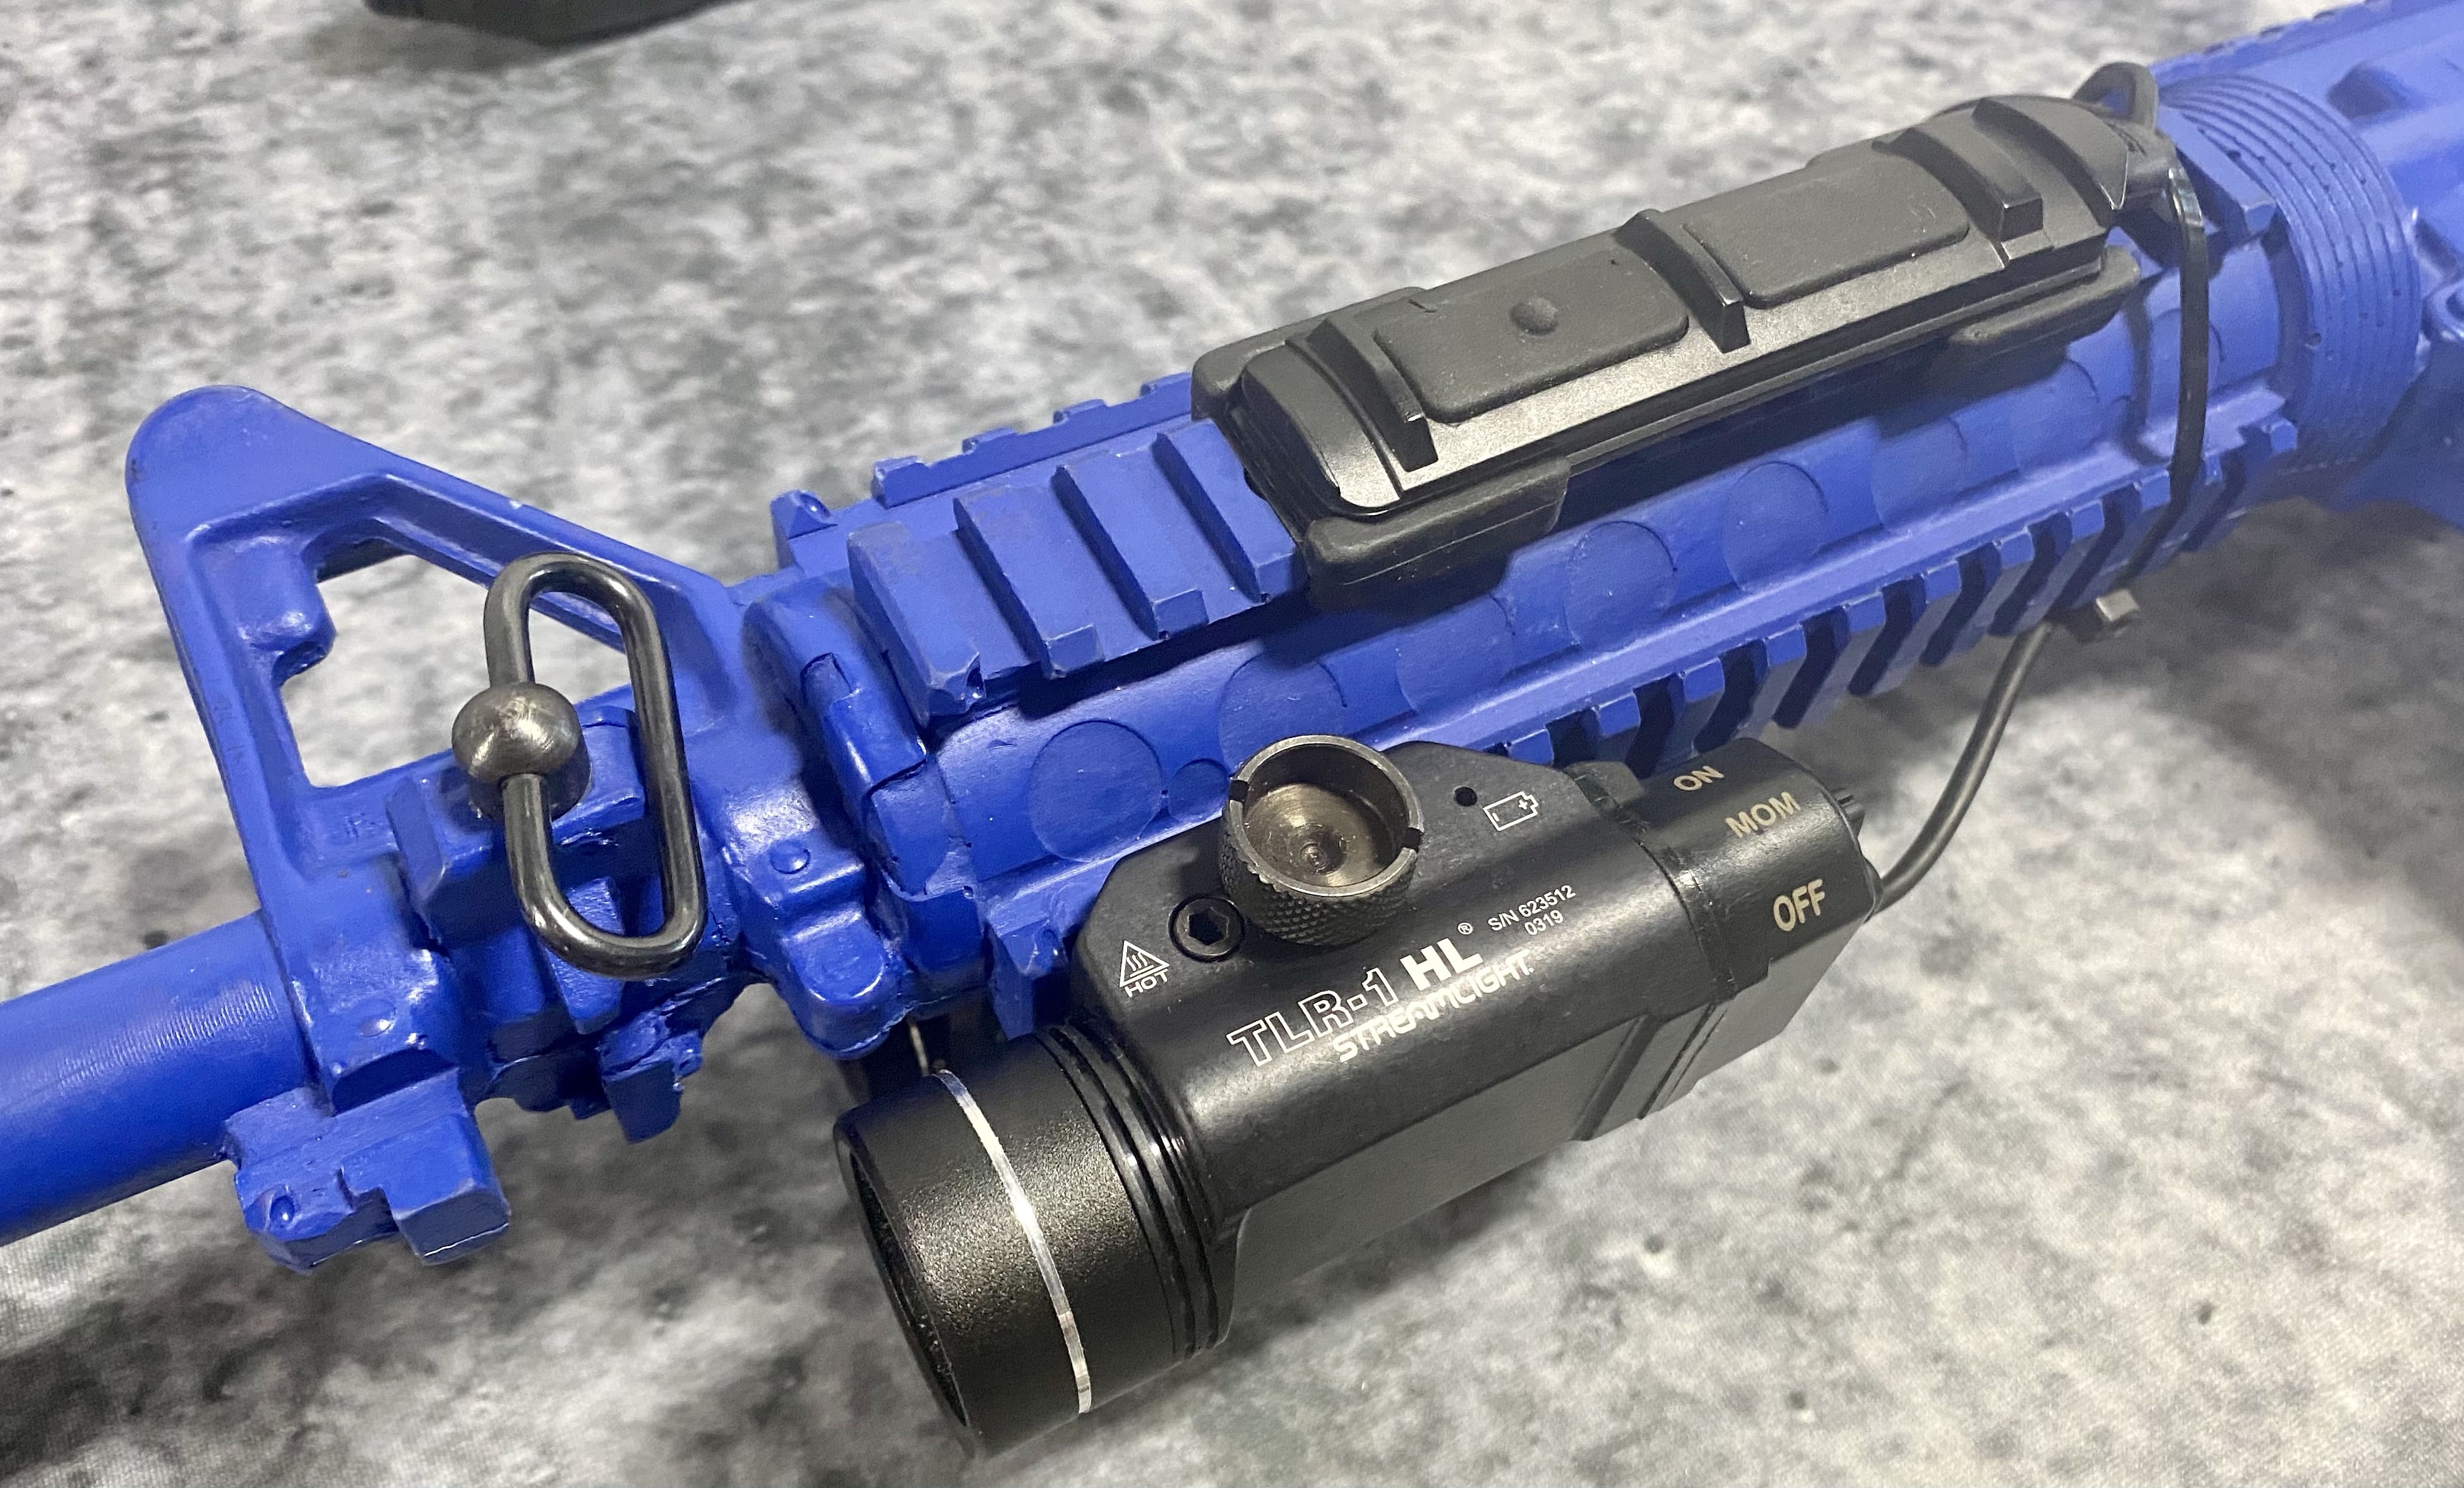 Streamlight TLR-1 HL with Dual Remote Switch Kit